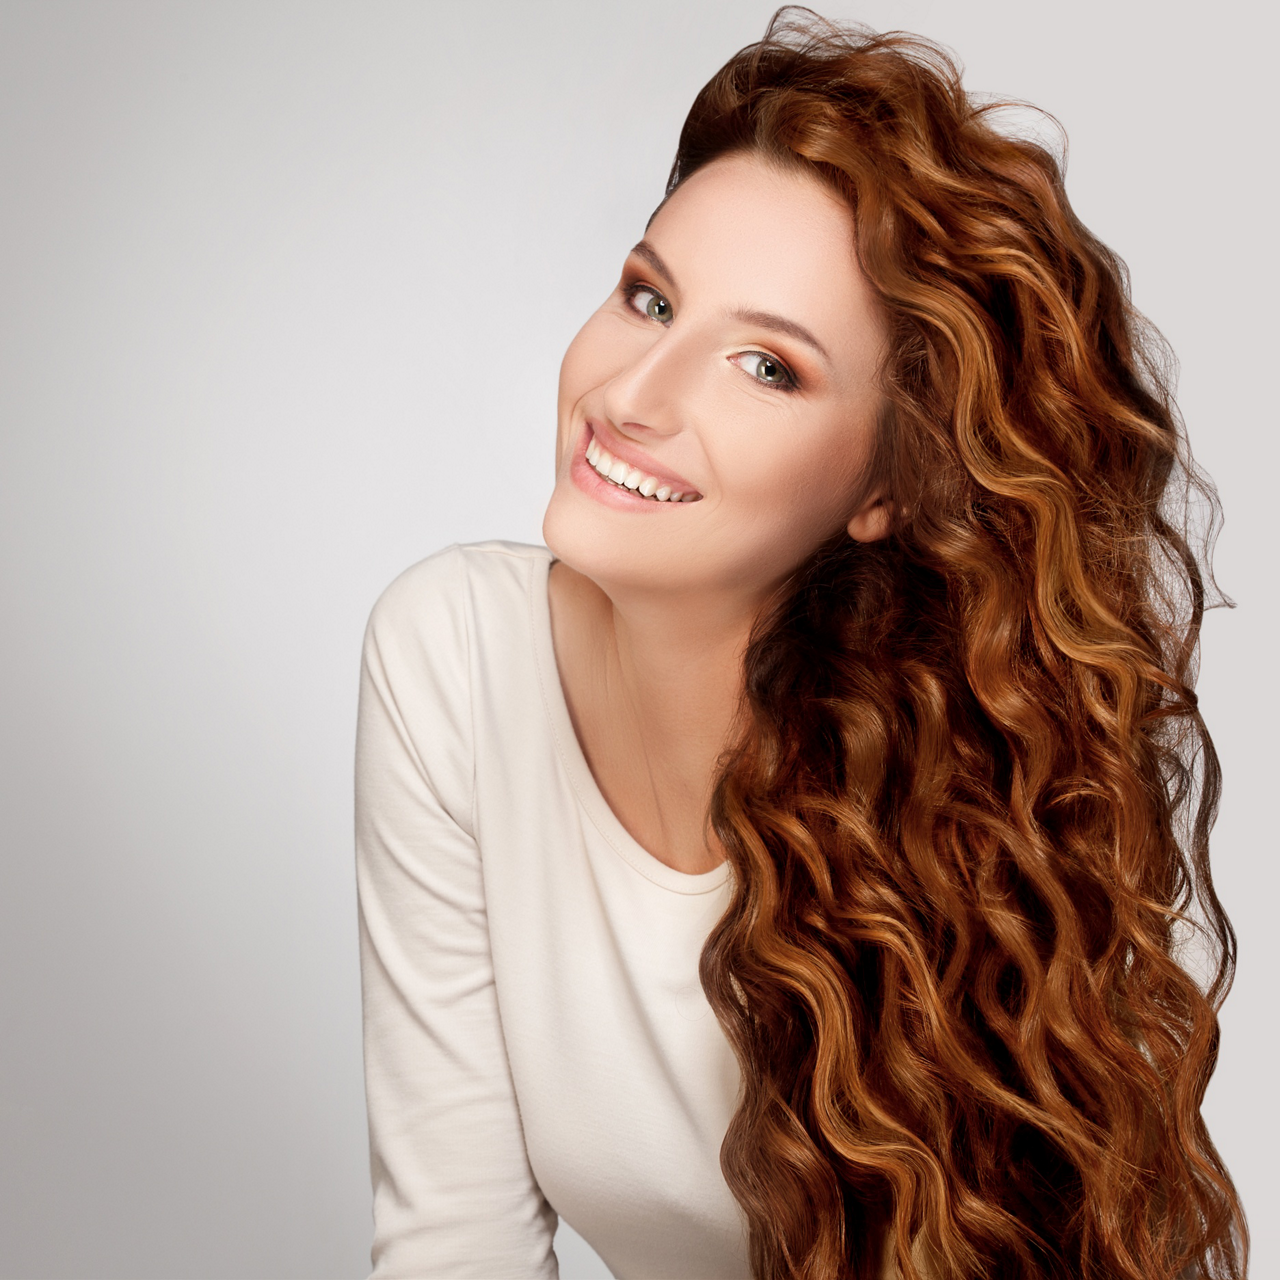 4 Hairstyles for Curly Frizzy Hair & Expert Styling Tips | John Frieda